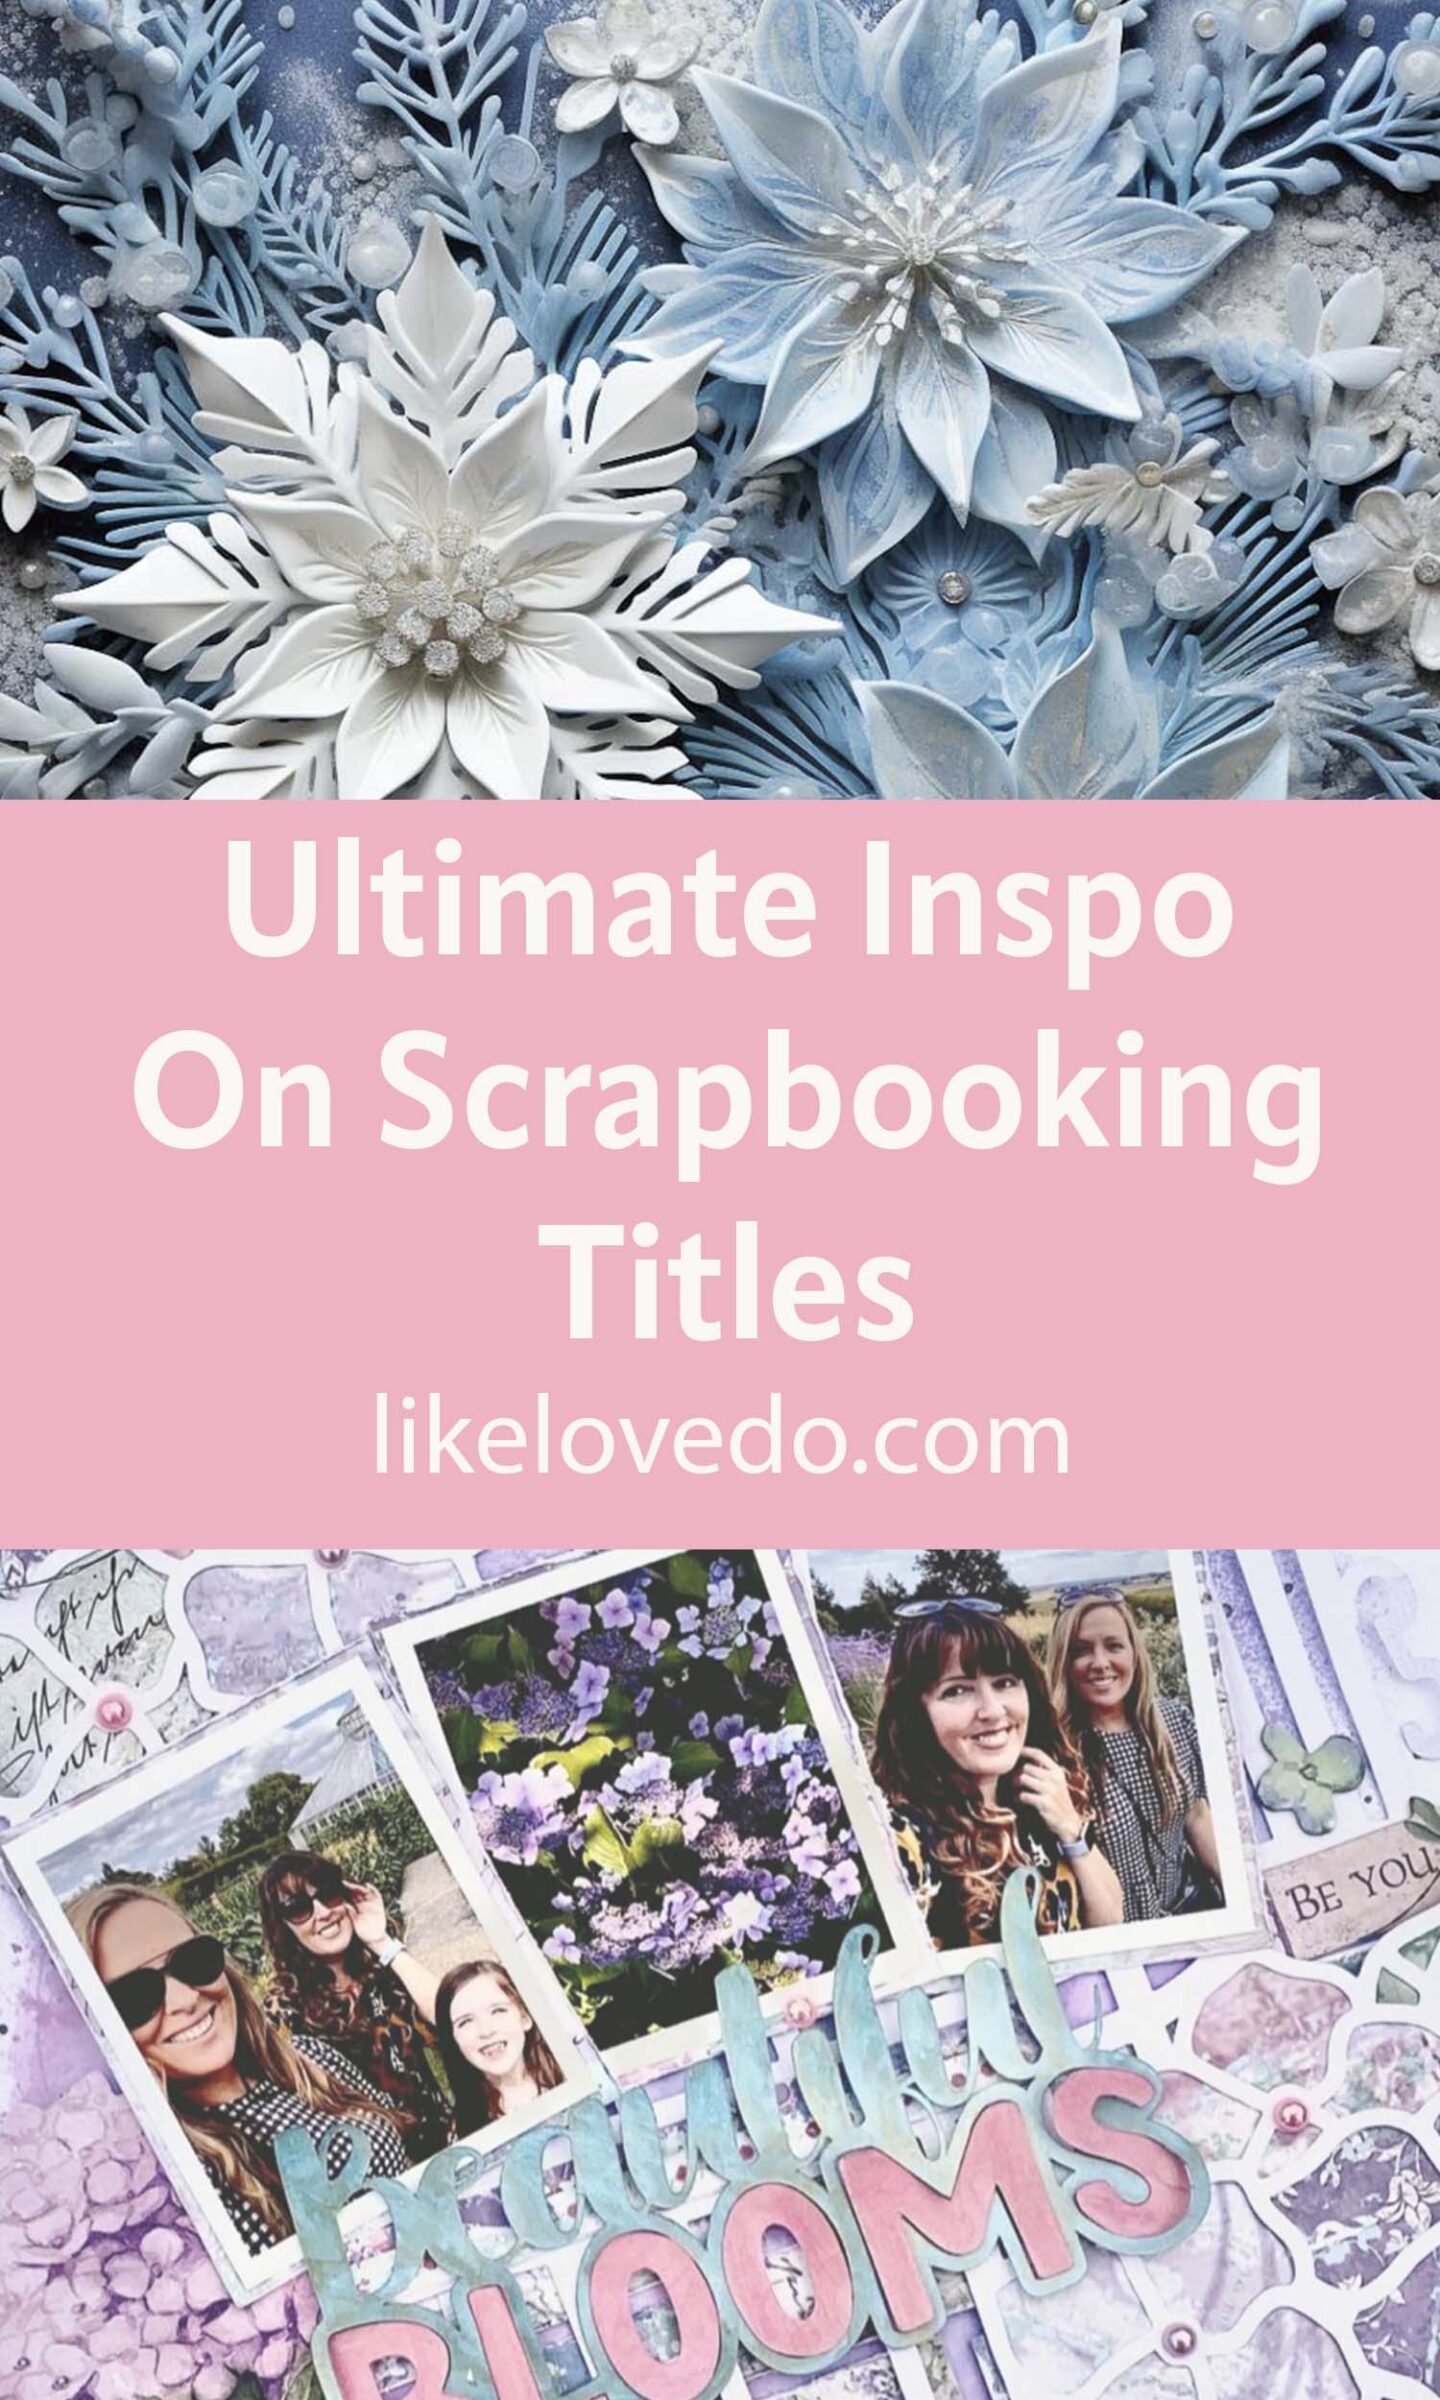 We have collated all of our titles for scrapbooking in this Ultimate lists of Scrapbooking Title Ideas on one page to give you the best inspiration for your scrapbooking page or album. Pin image